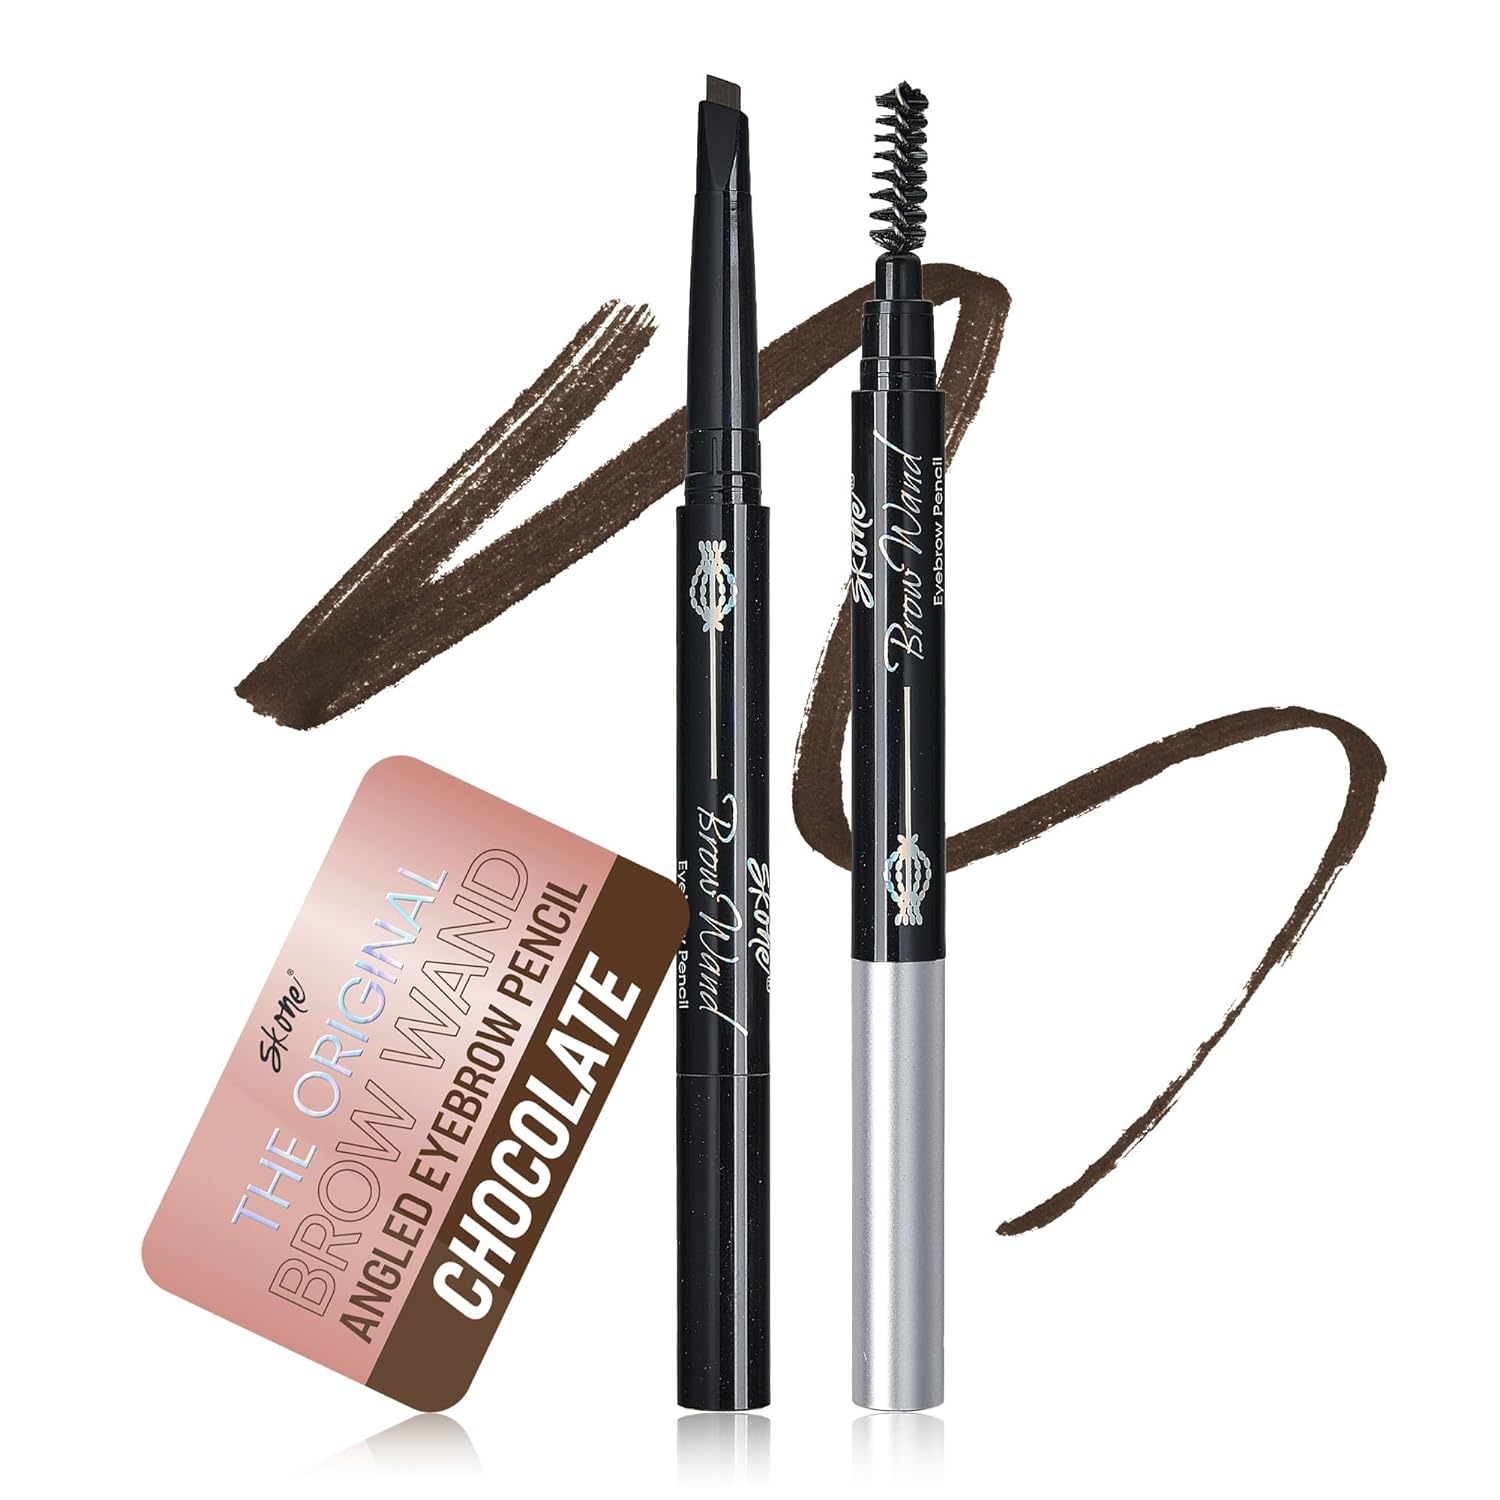 Skone Cosmetics The Original Brow Wand Eyebrow Pencil with Brush - Dual-Sided Retractable Waterproof Long-Lasting Brown Eye Brow Pencils for Women with Sleek Eyebrows - Chocolate for Brunettes